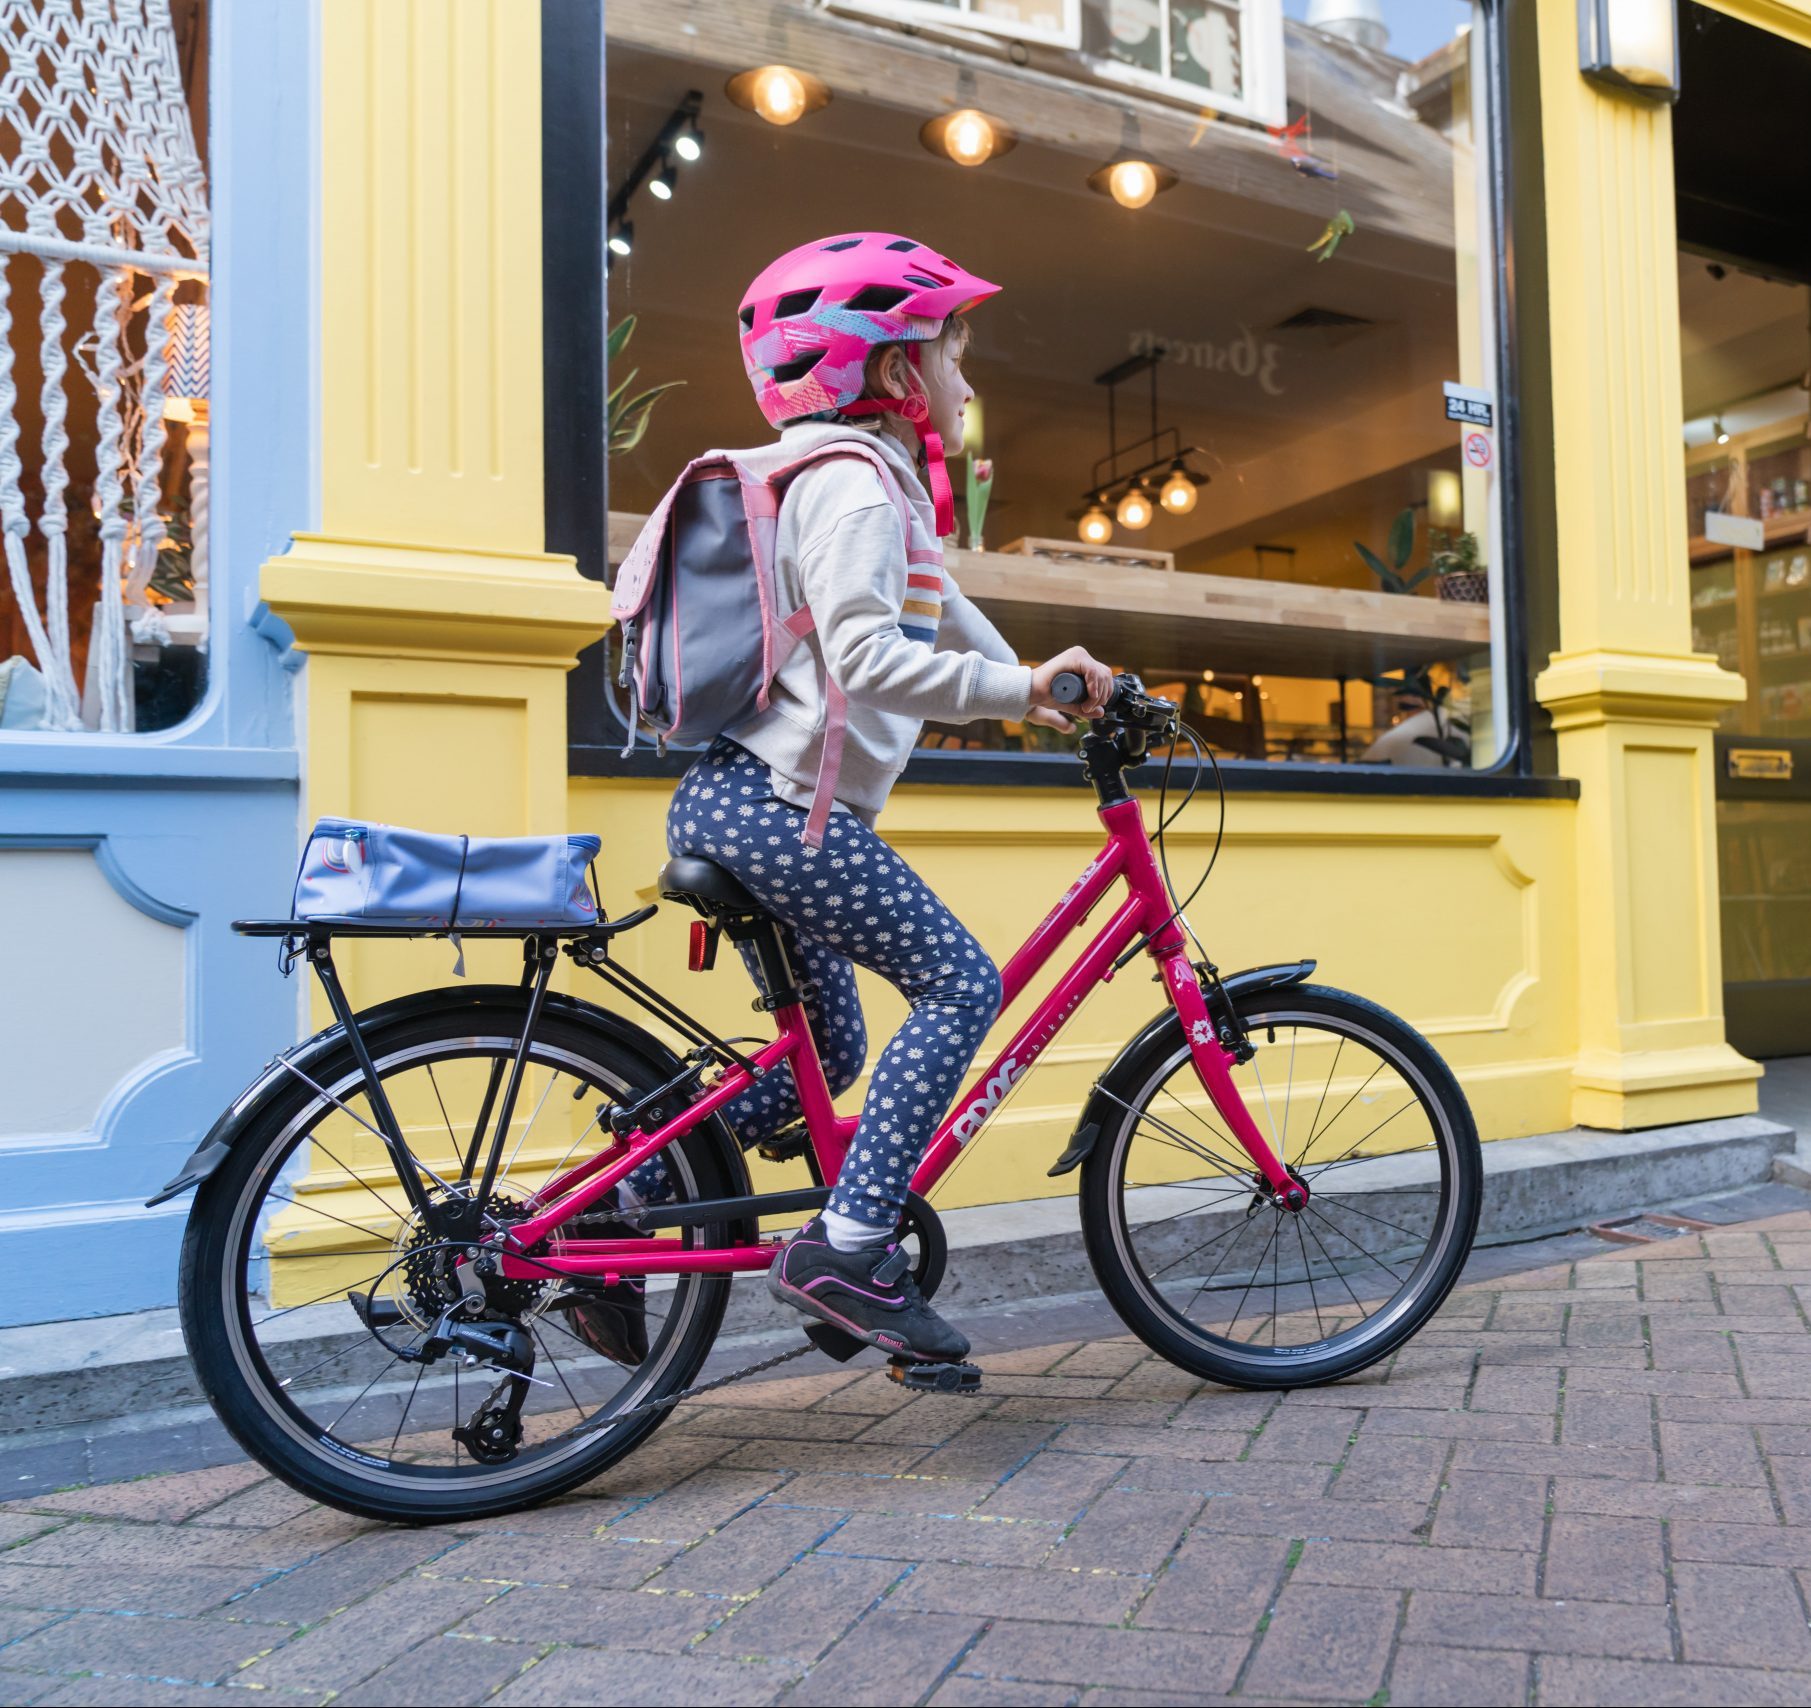 A child wearing a backpack and a pink helmet cycling on a red cycle on a high street